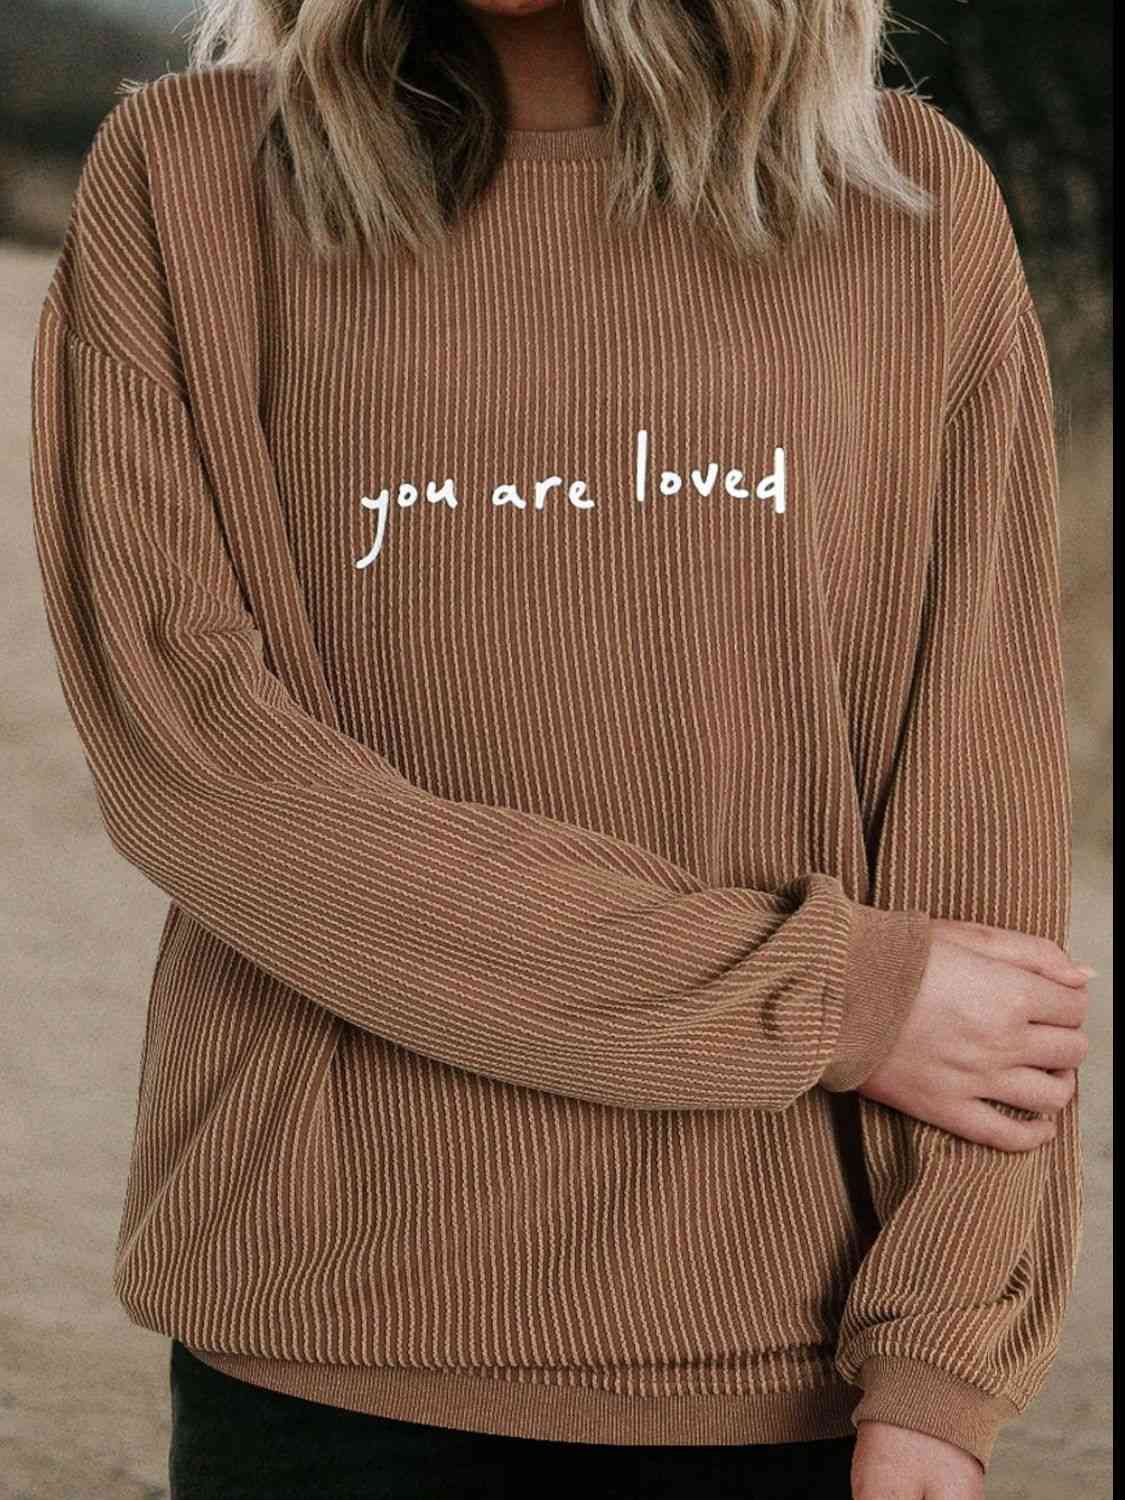 YOU ARE LOVED Graphic Dropped Shoulder Sweatshirt